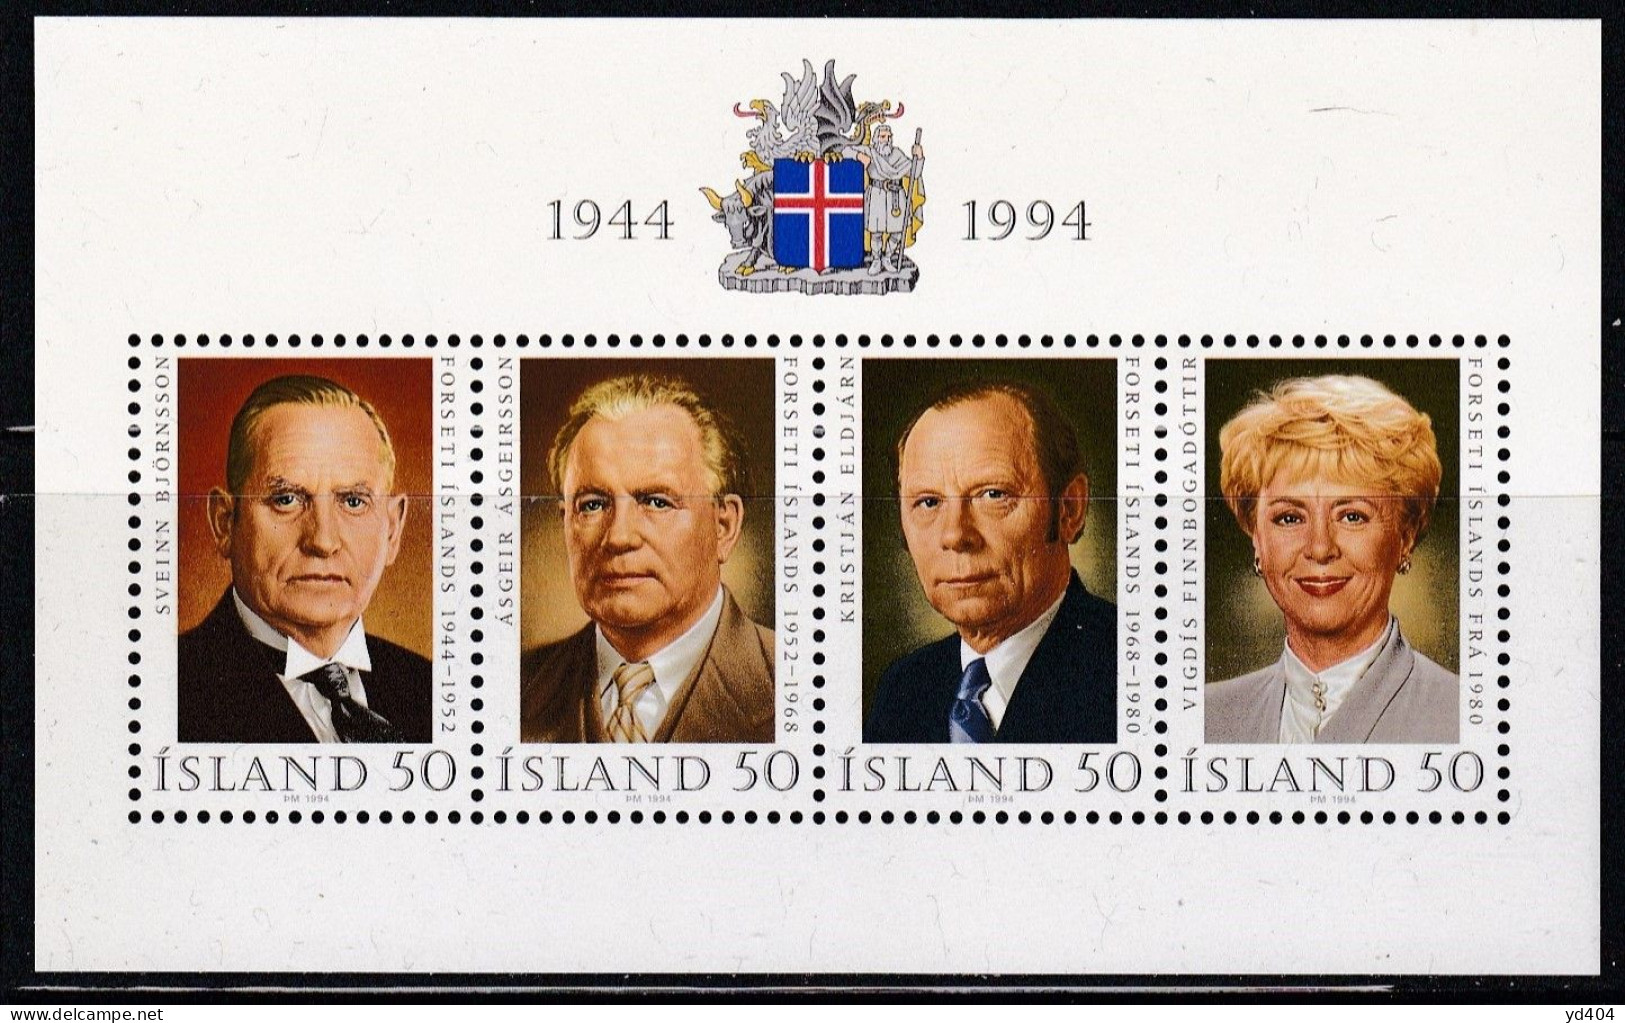 IS484 – ISLANDE – ICELAND – 1994 – 50th ANNIVERSARY OF REPUBLIC – SG # MS 829 MNH 11,50 € - Blocs-feuillets